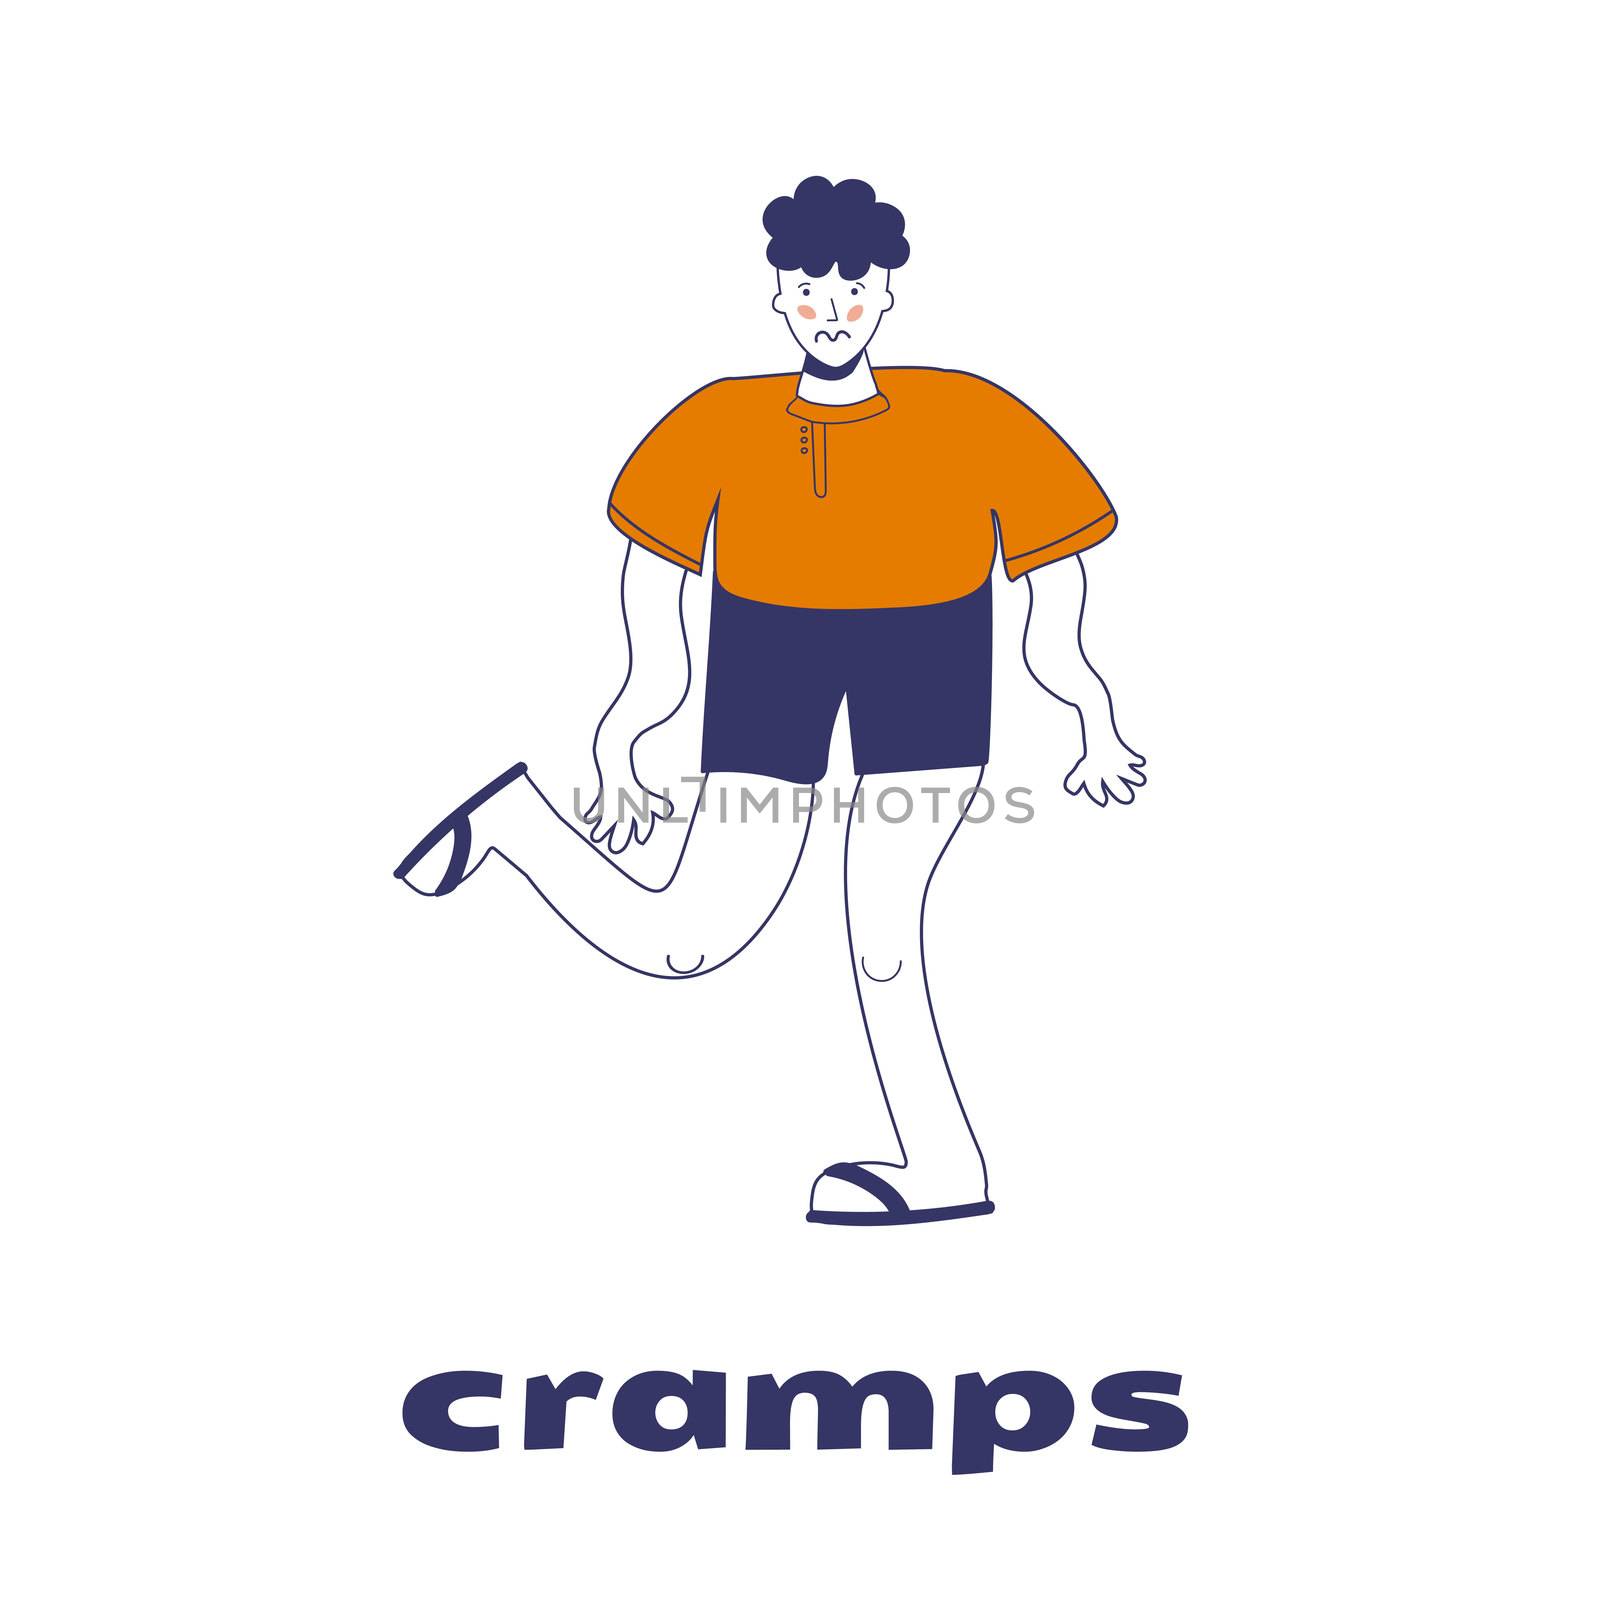 The man has cramps. Legs and arms tremble. The guy has convulsions. illustration with blue outline in cartoon hand-drawn style